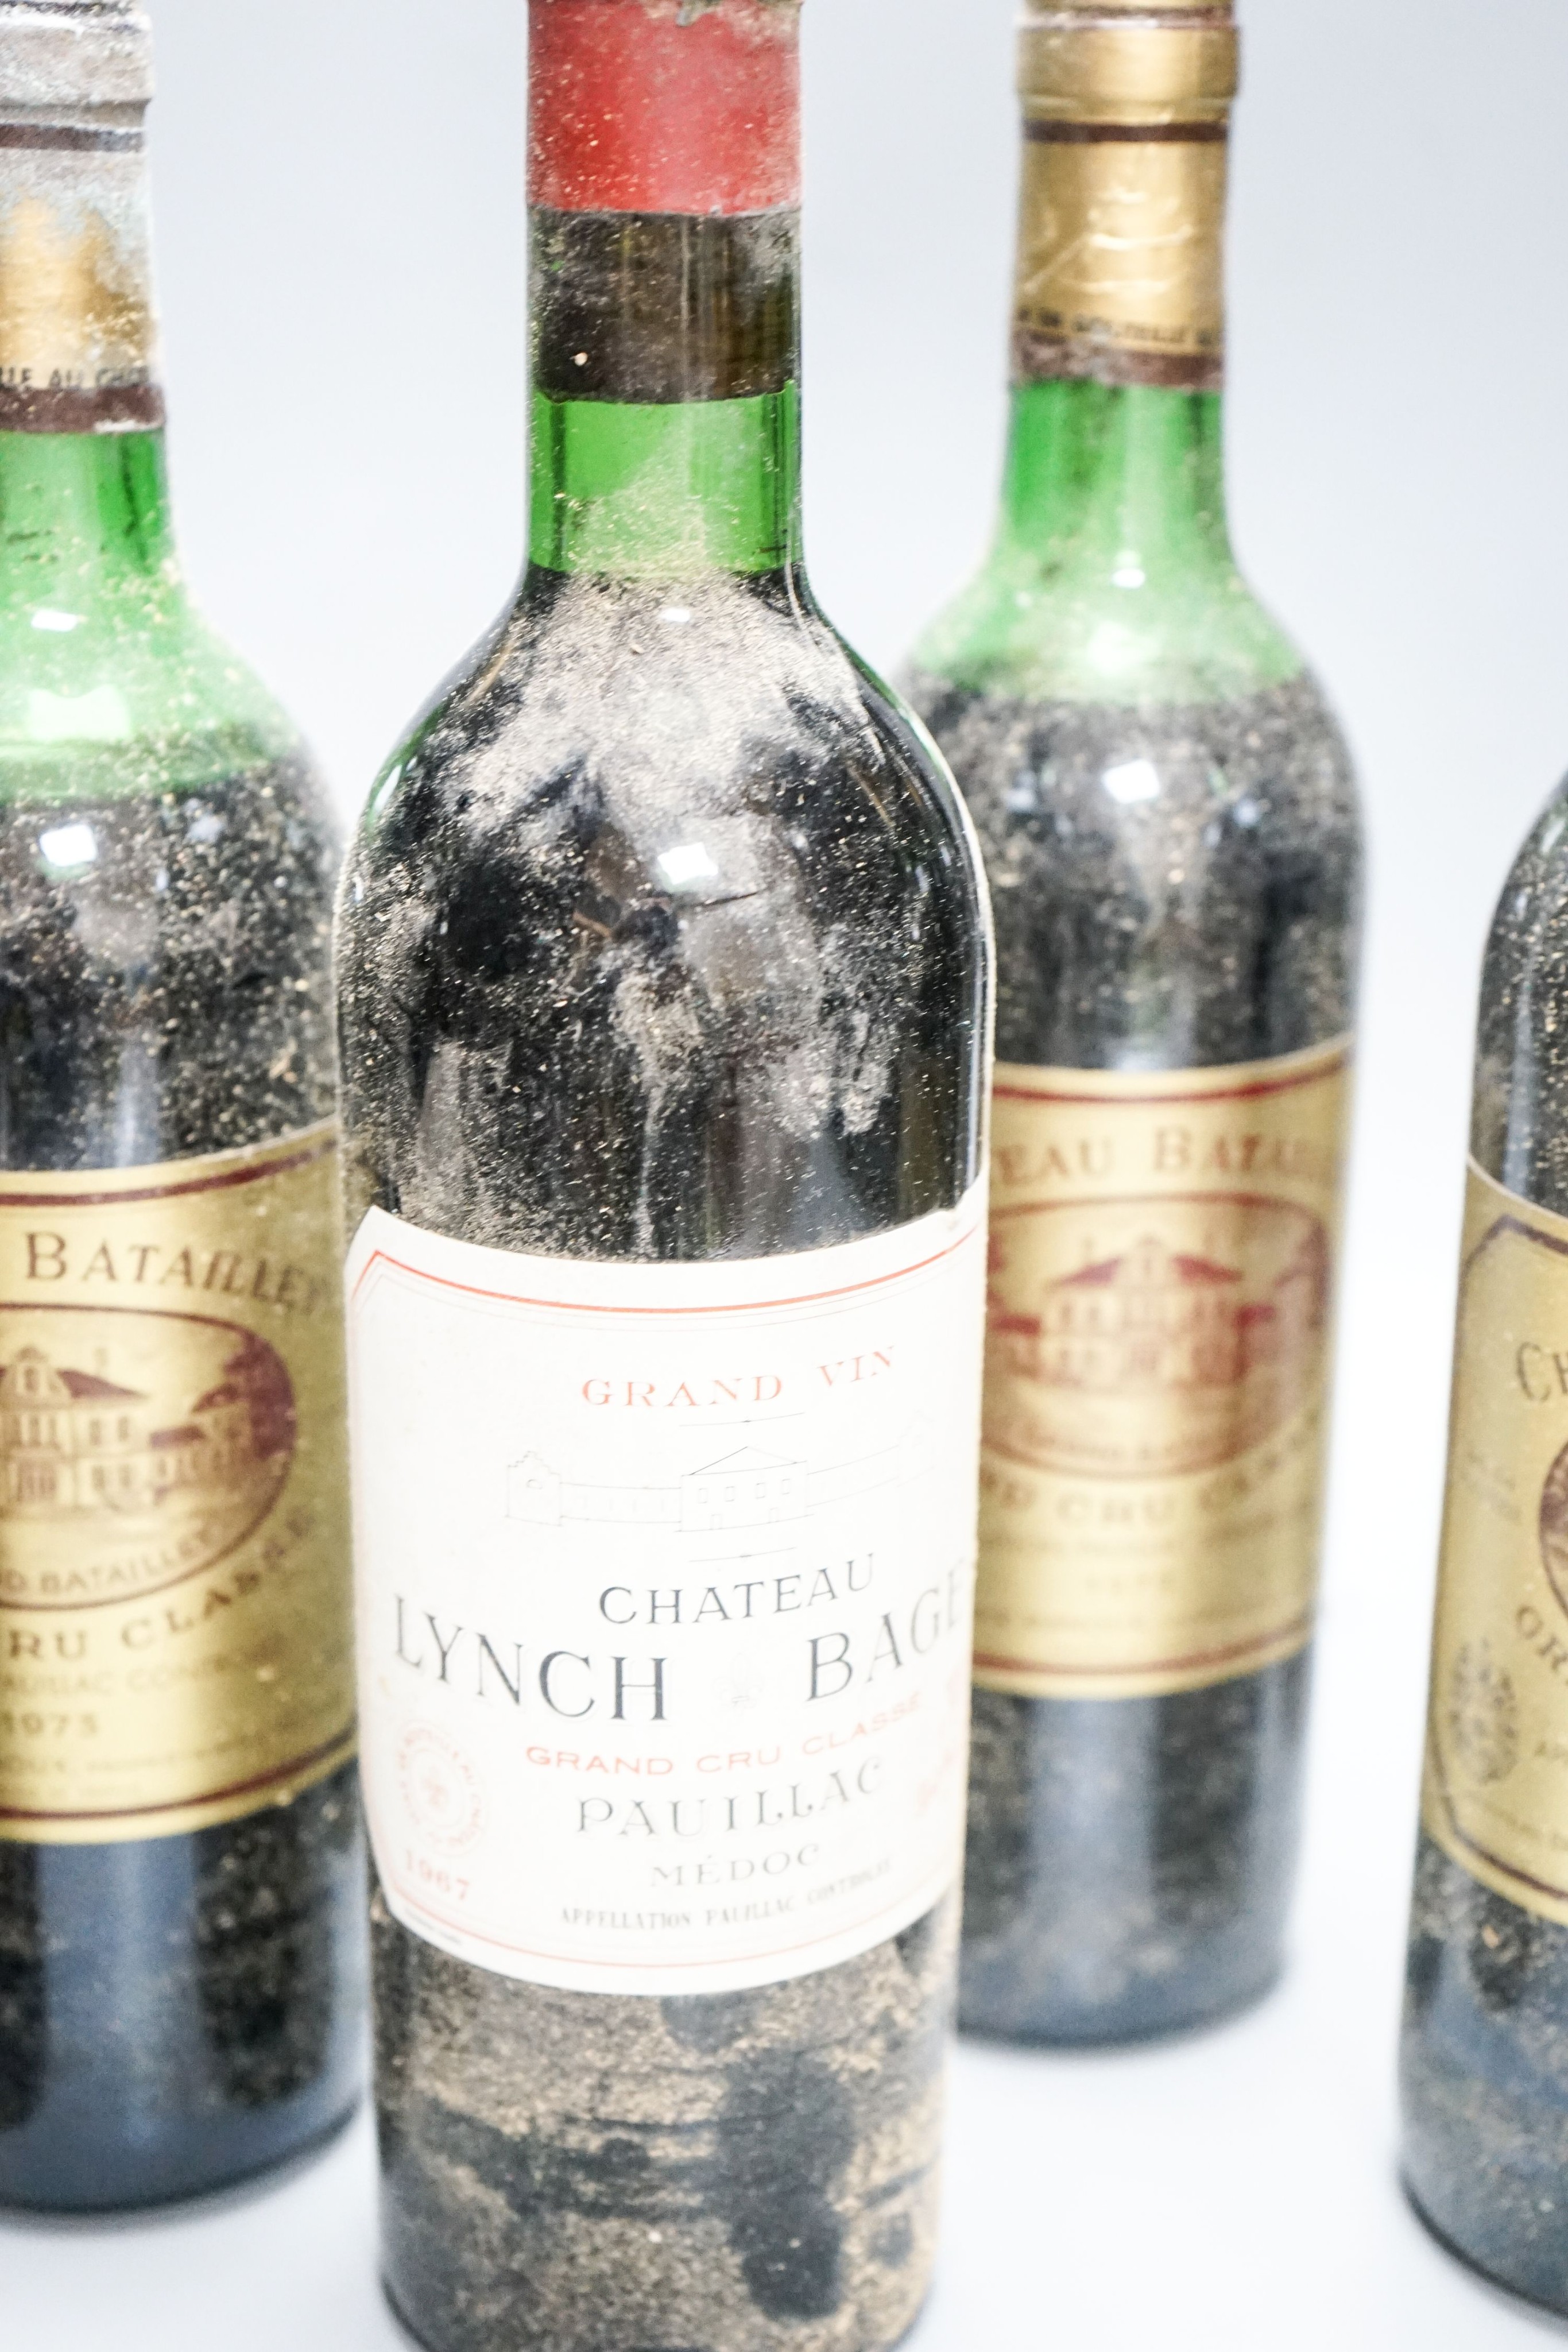 Four bottles of Chateau Batailley grand cru 1973 and 2 bottles of Chateau Lynch Bages 1967